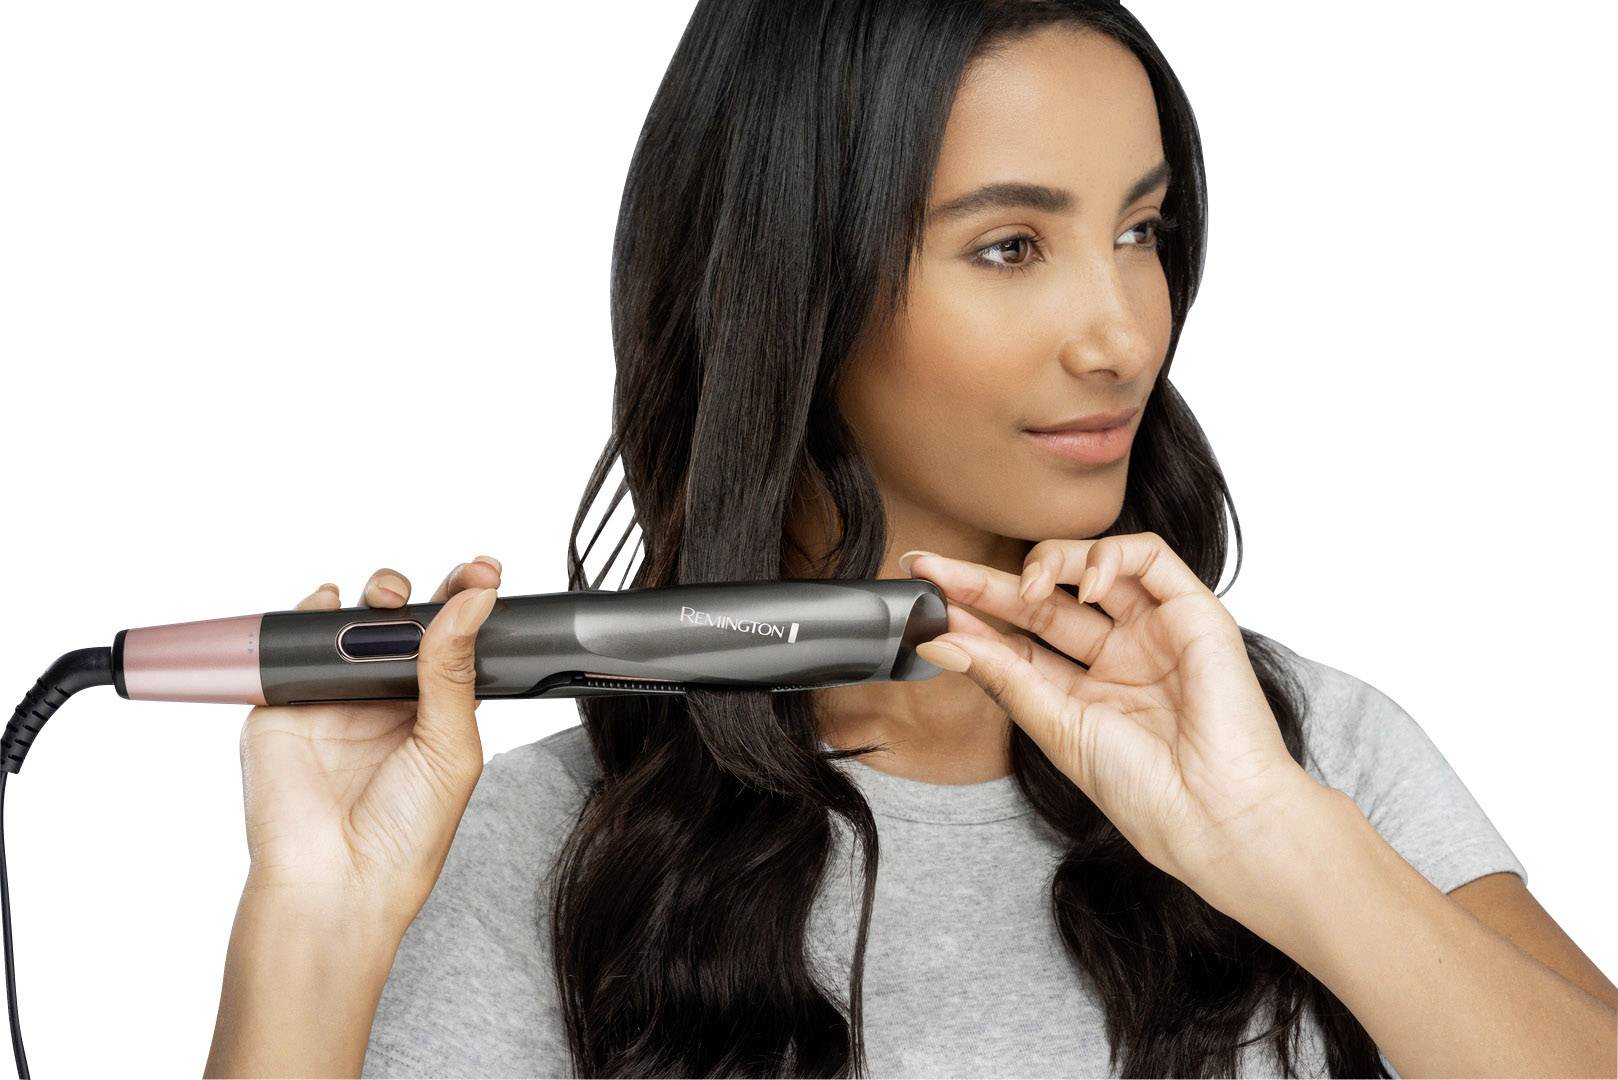 Curl 6. Remington Curl confidence s6606. Фен-щетка Remington Curl&straight confidence as8606. Xn-z02 hair Straightener.